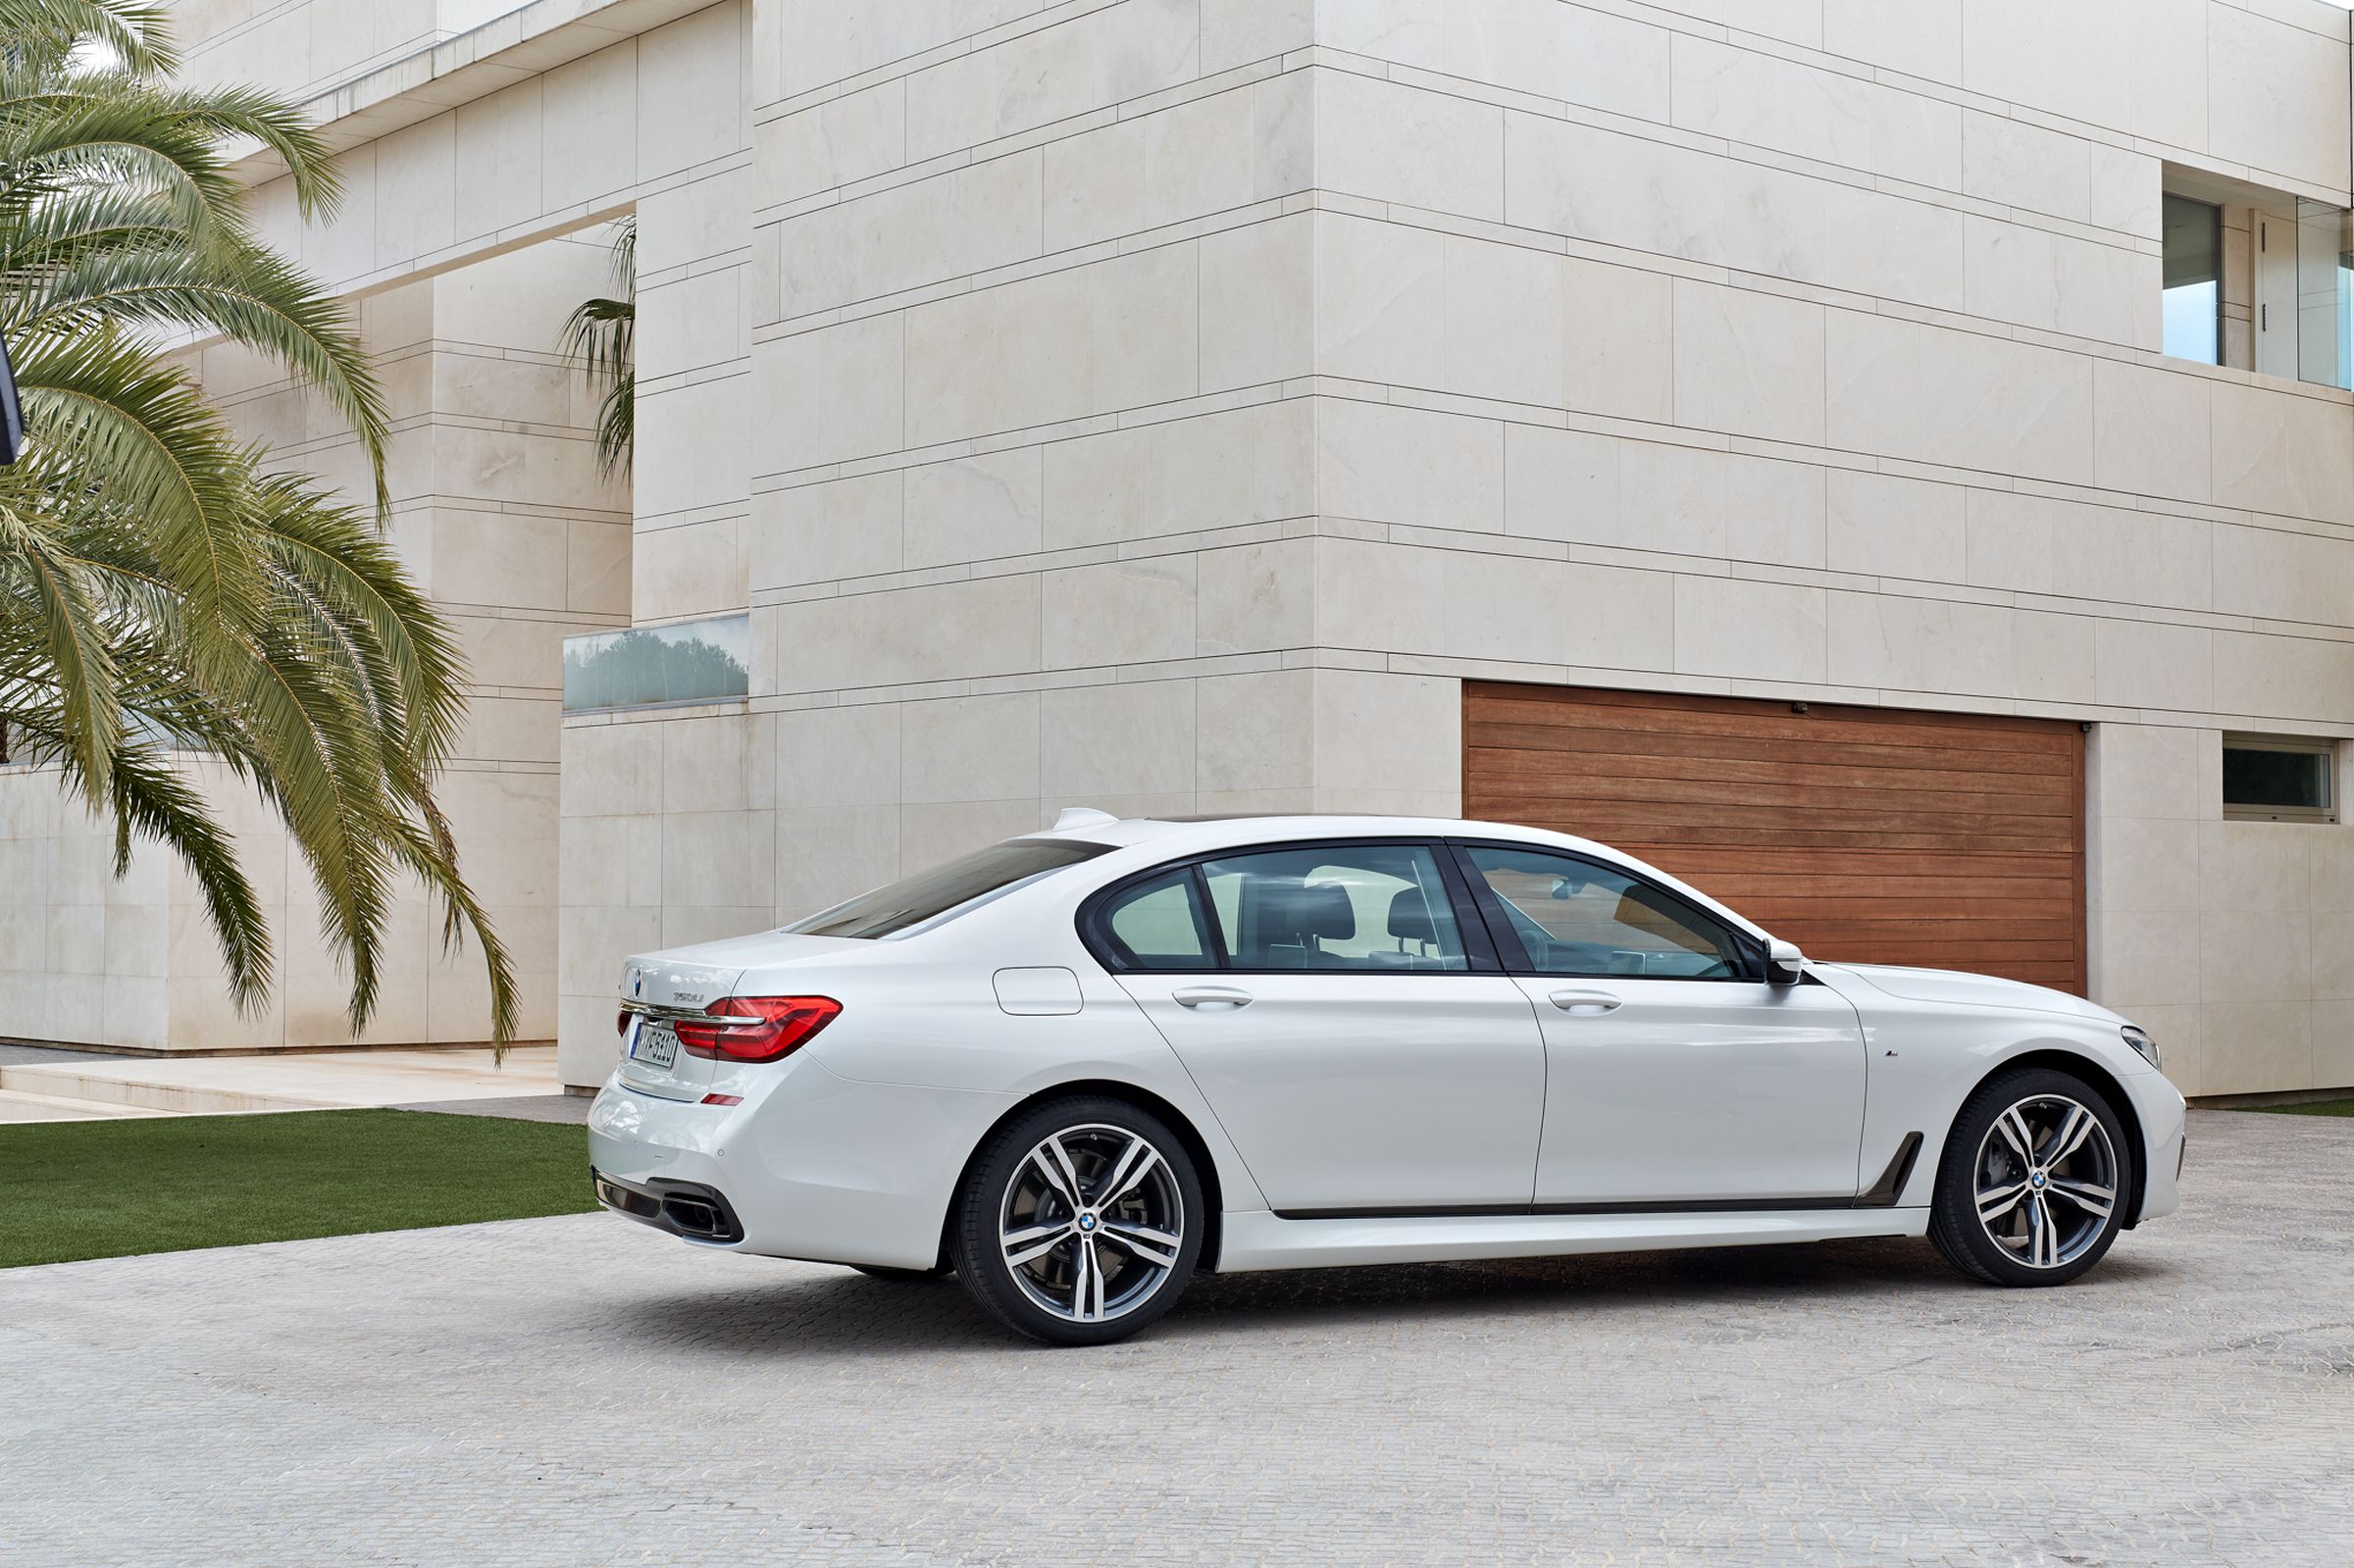 BMW 7 series images